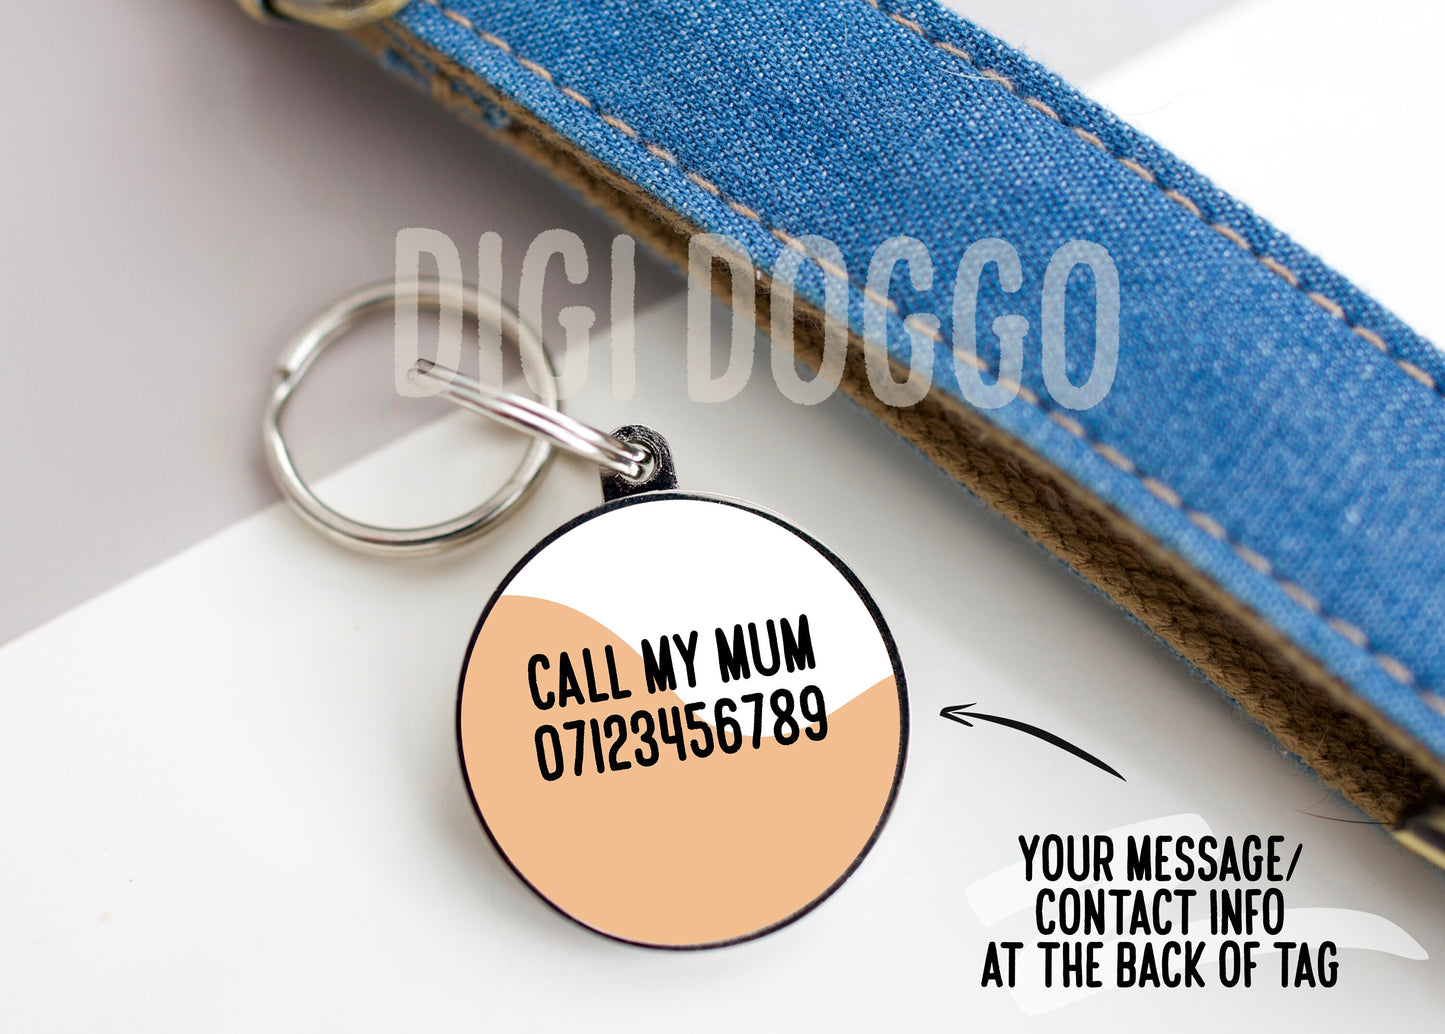 Collie Outline ID Tag/ Personalised Circle ID Dog Tag/ Customised Dog Breed Charm/ Trendy Collie Owner Gift/ Keepsake Collie Lover Gift